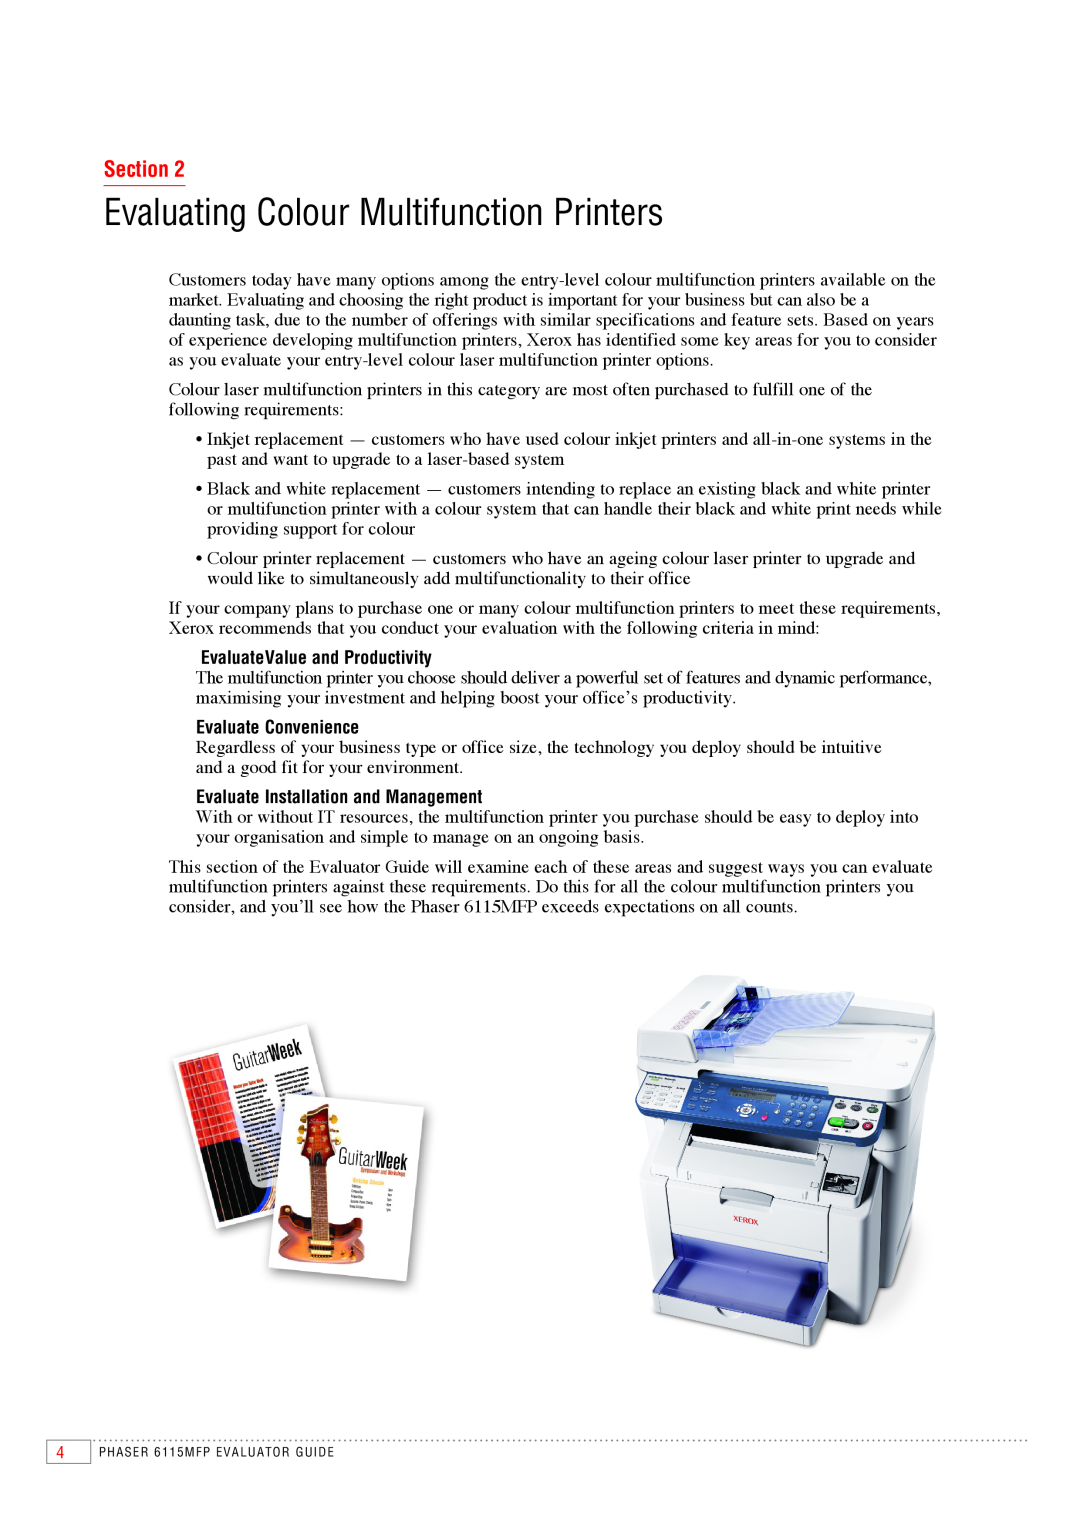 Xerox 6115MFP manual Evaluating Colour Multifunction Printers, Section 